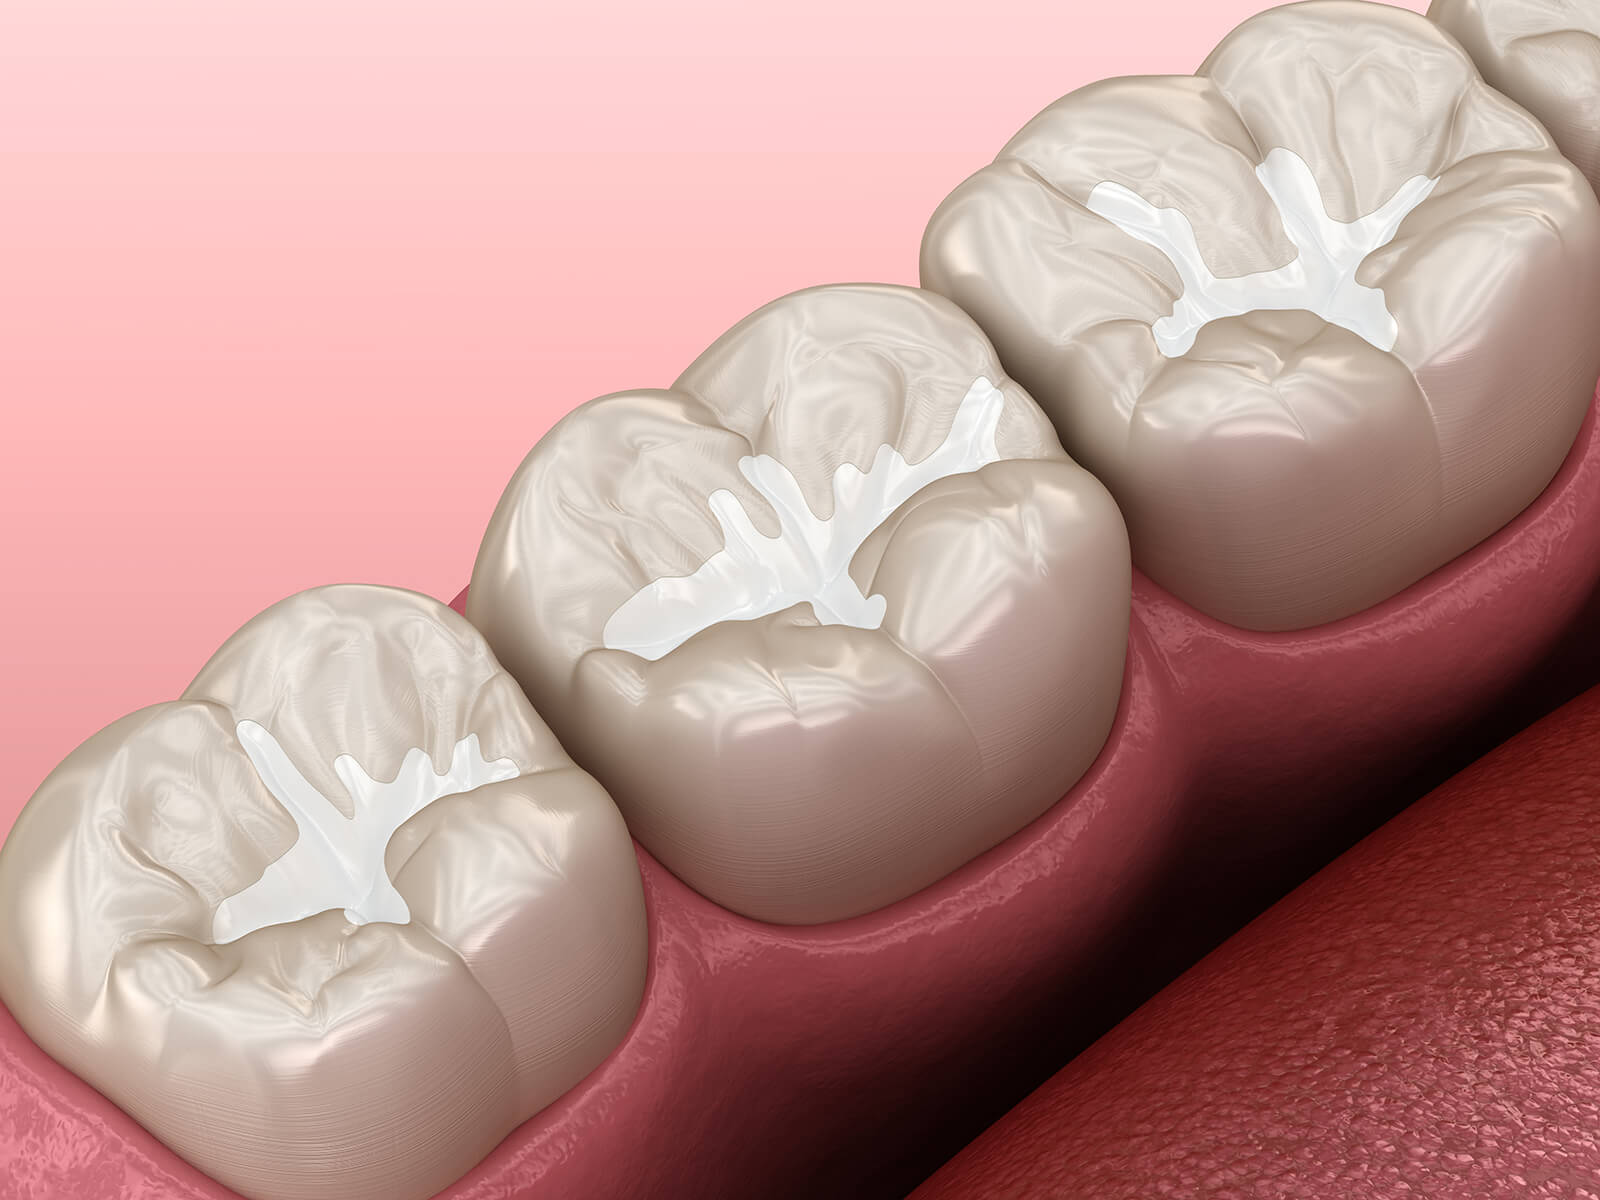 How Can You Solve The Dental Sealants Issues?